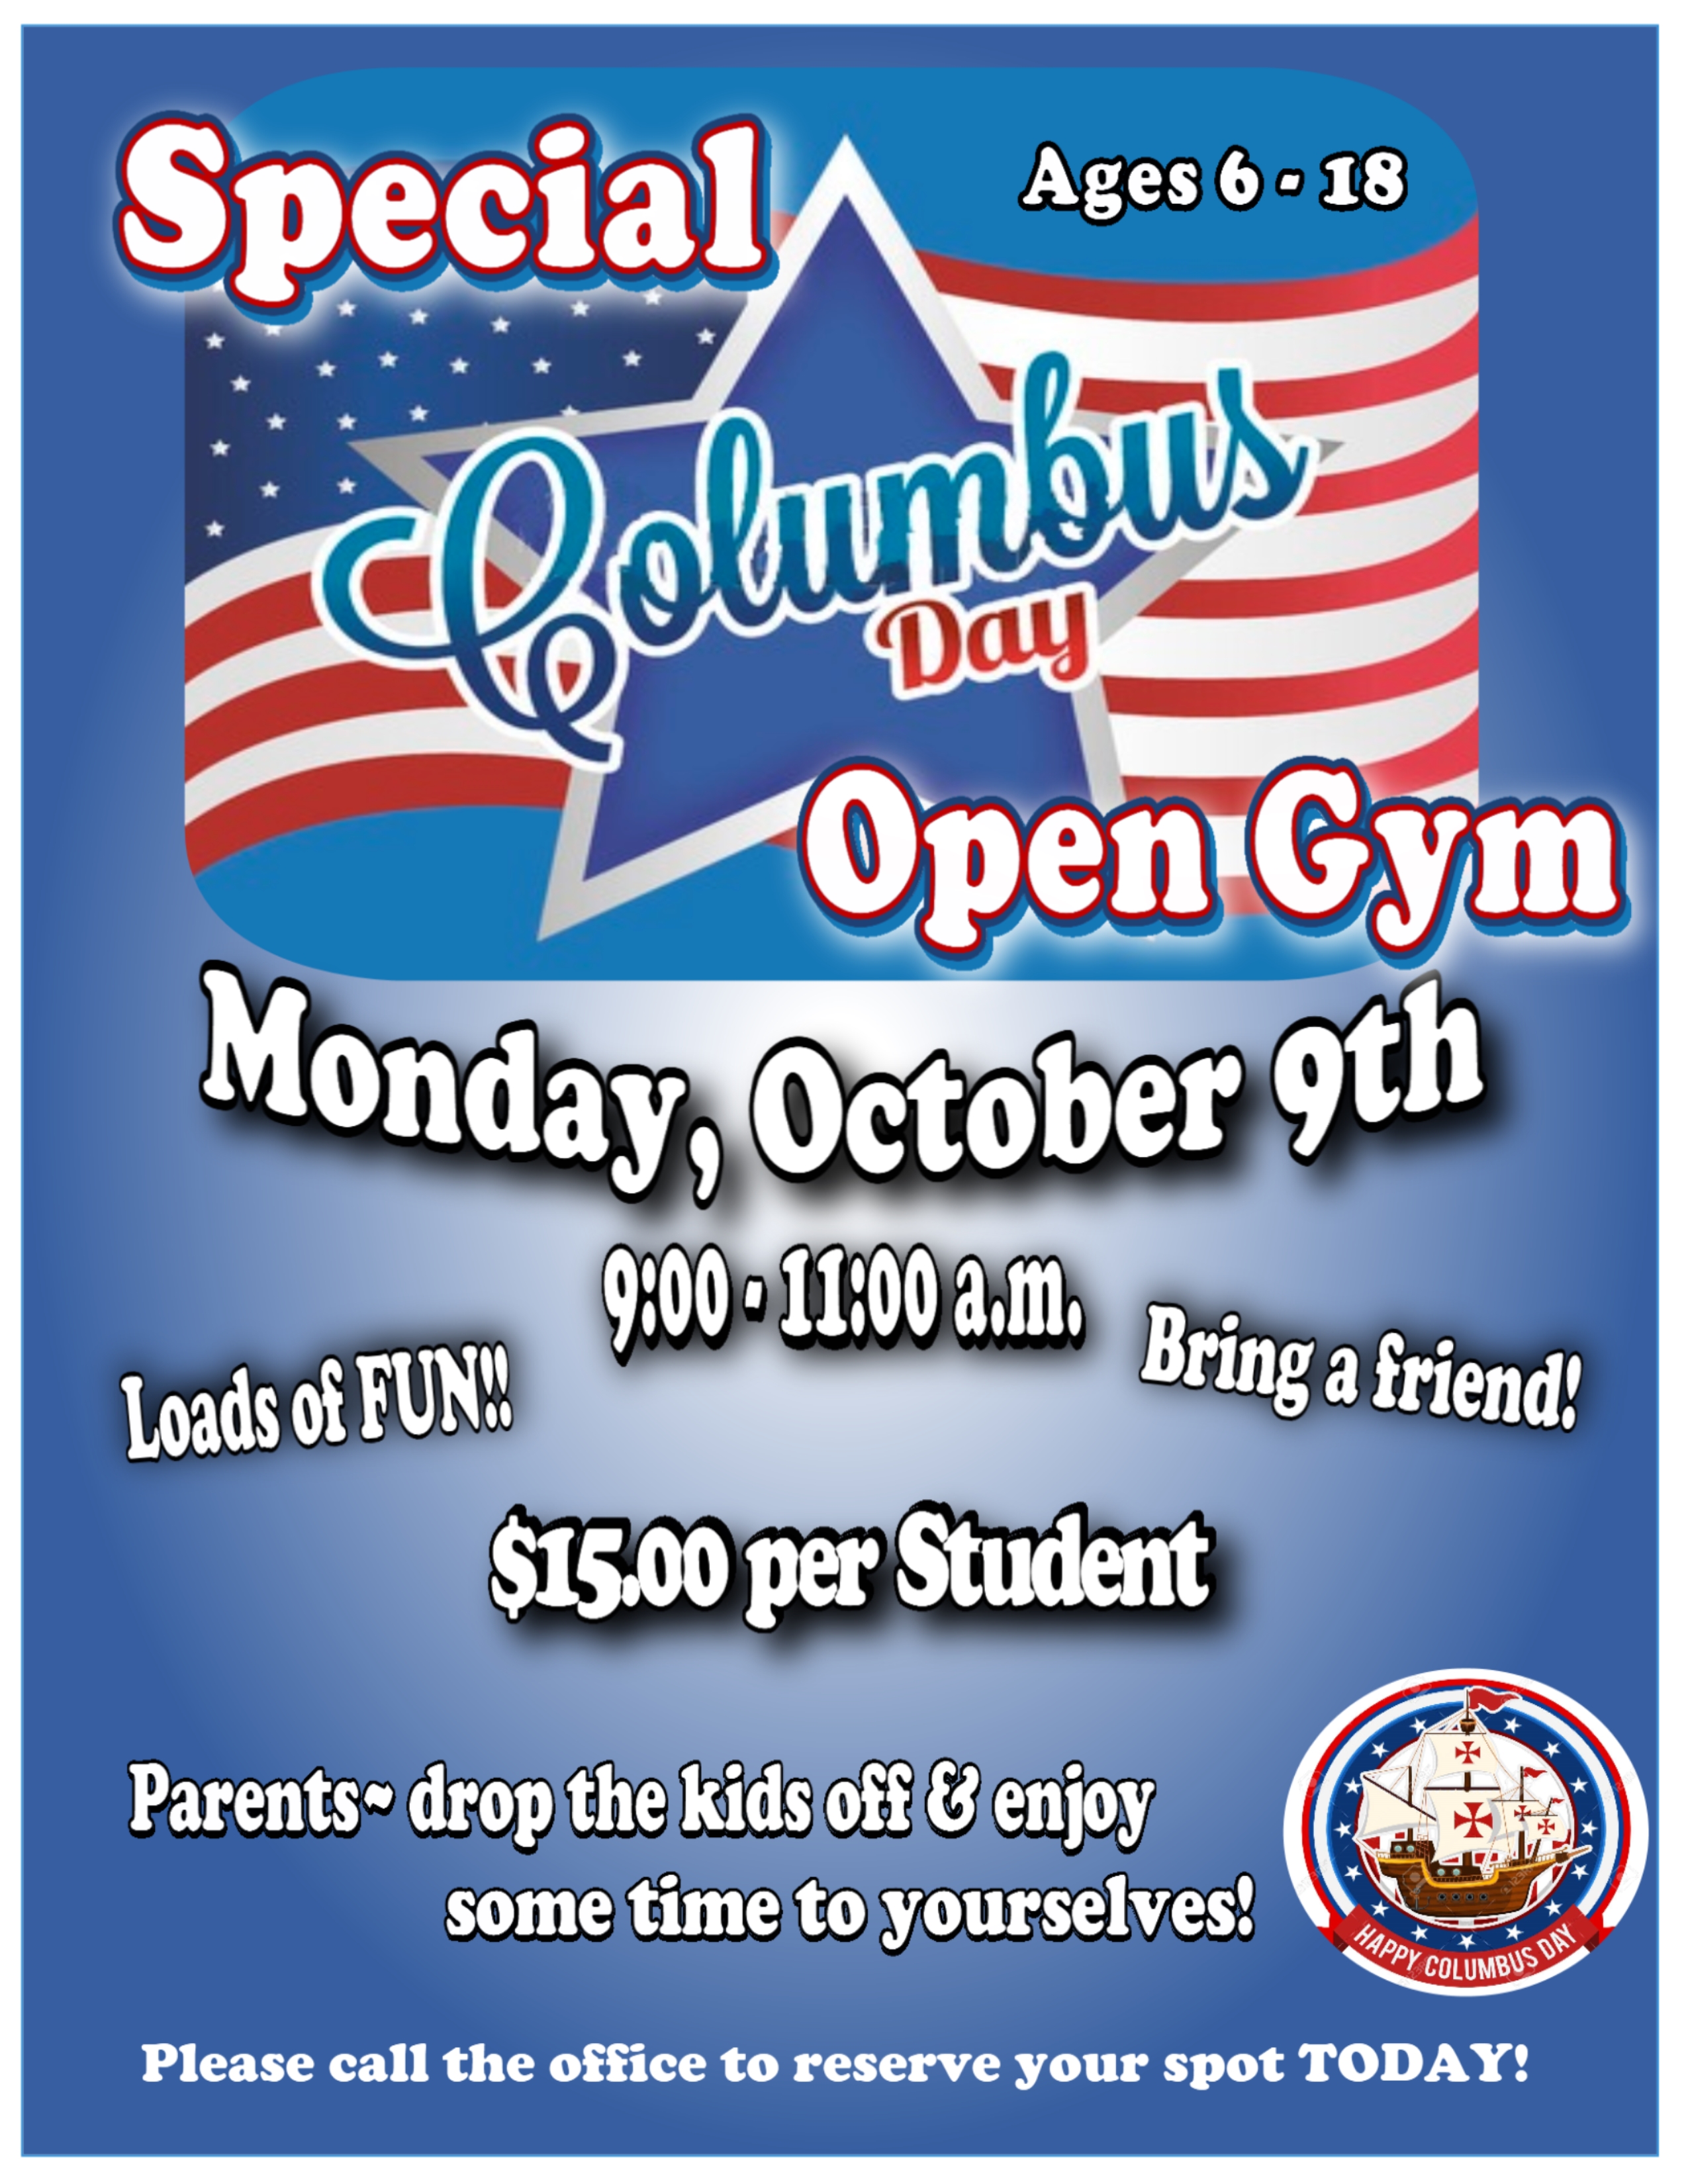 Special Columbus Day Open Gym Oct. 9th